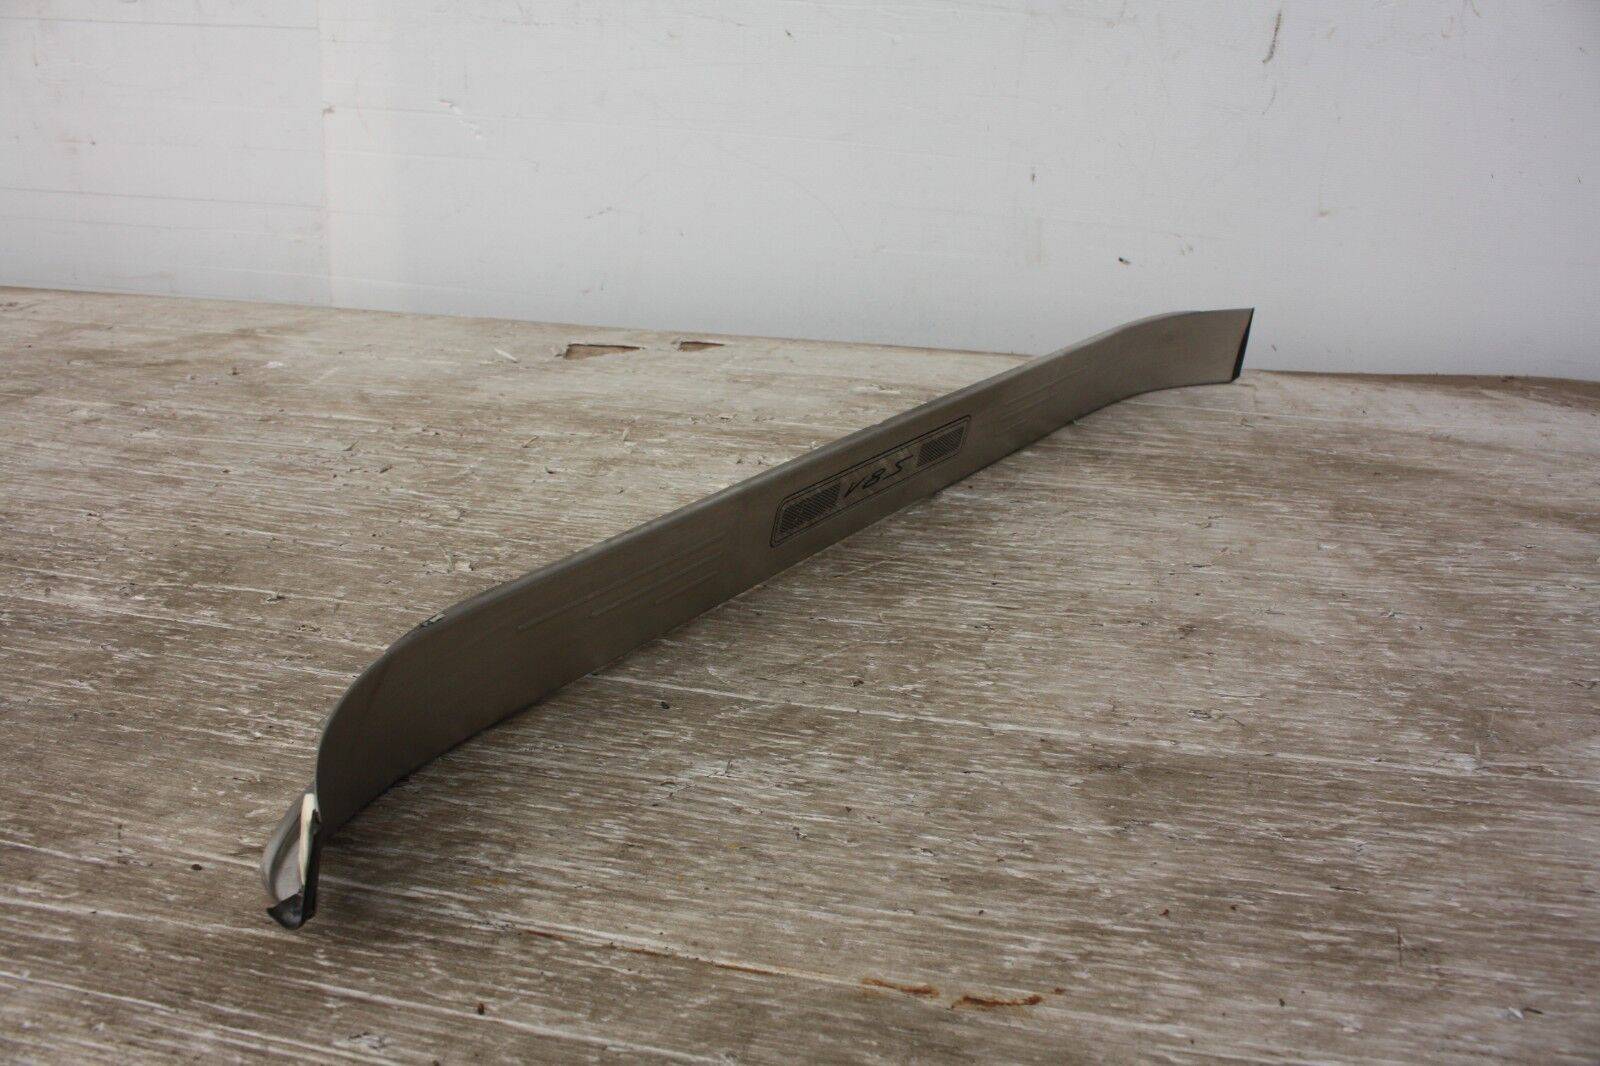 BENTLEY-CONTINENTAL-GT-V8S-DOOR-ENTRY-SILL-STEP-TRIM-2013-TO-2018-175367528501-10